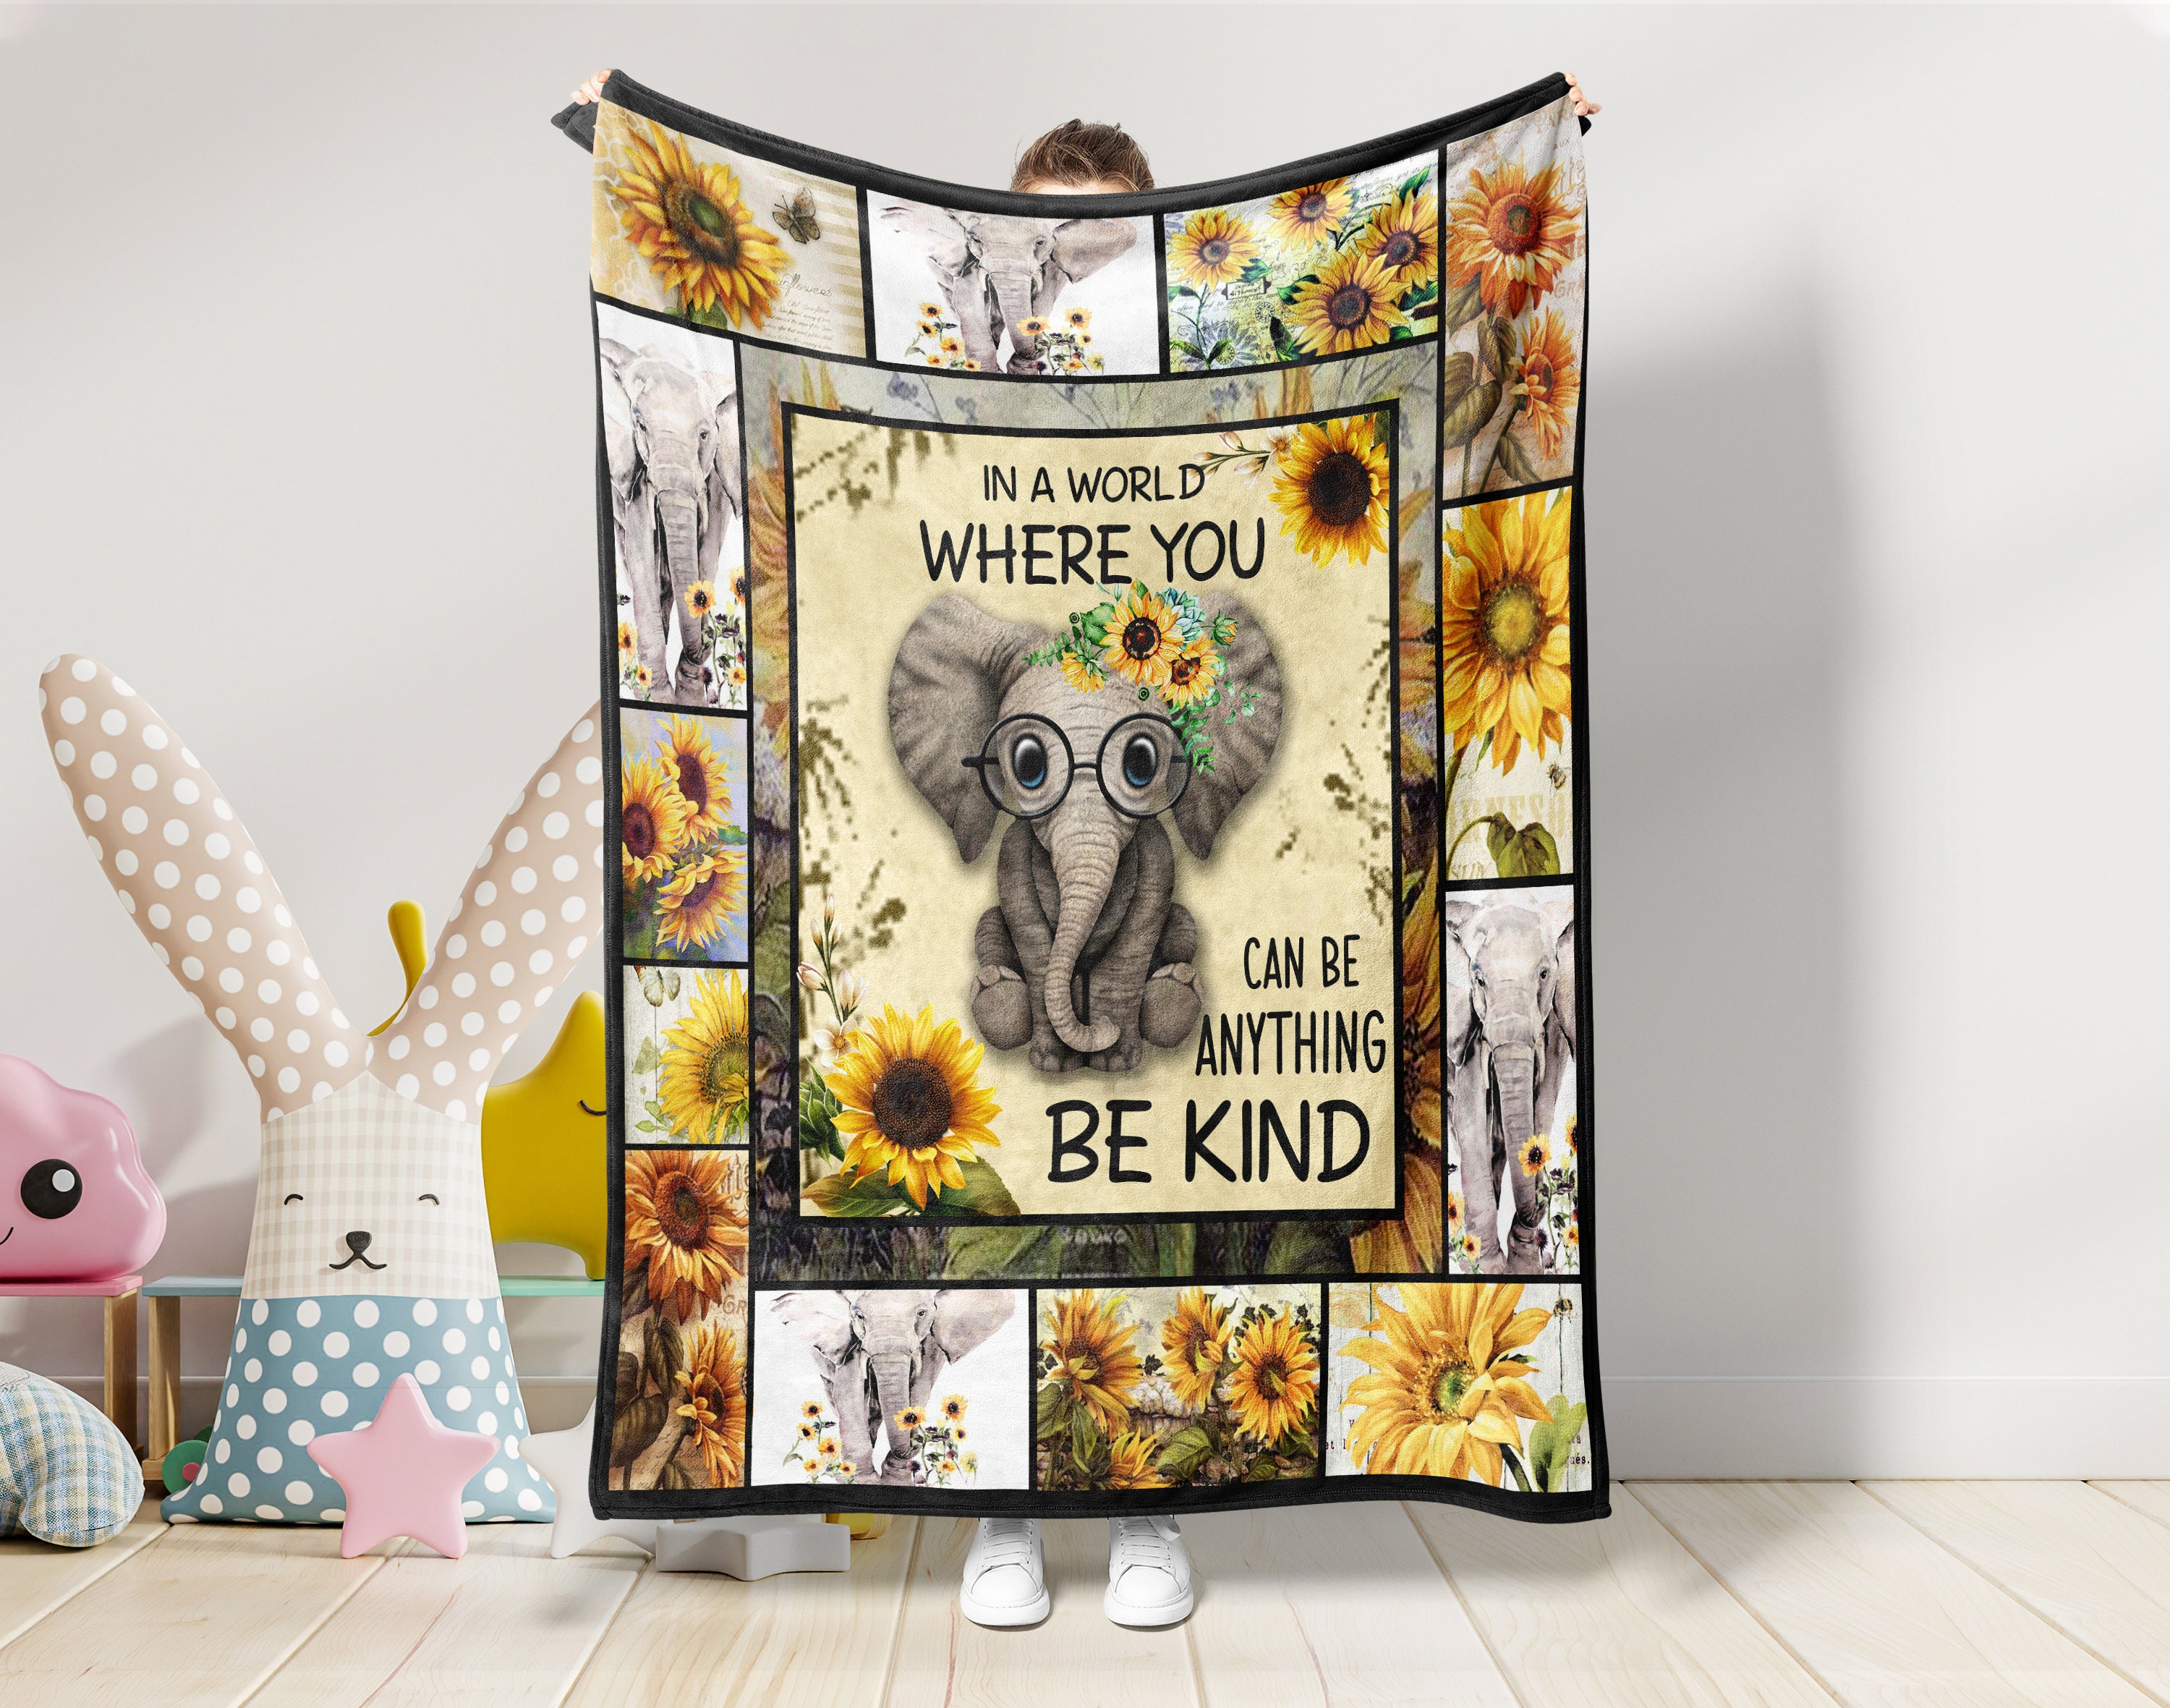 Elephant Blanket Flannel Soft Throw Blanket Elephant Gifts for Women Unique  Elephant Lovers Gifts 50×60 Inches 